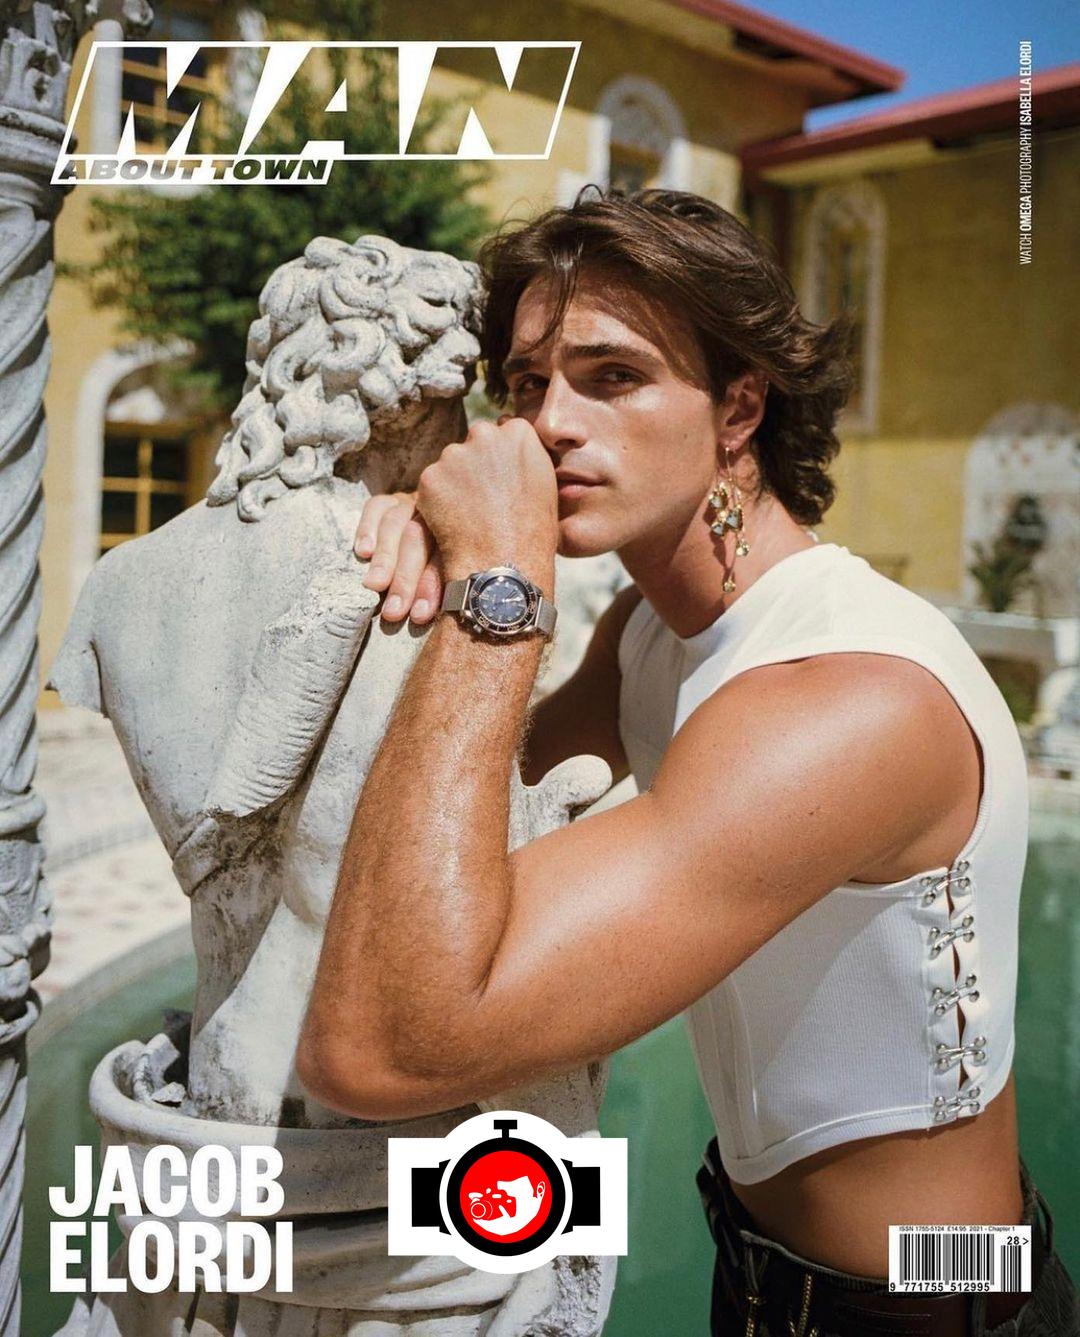 Jacob Elordi's Watch Collection: Exploring the Omega Seamaster 300M No Time To Die 007 Edition